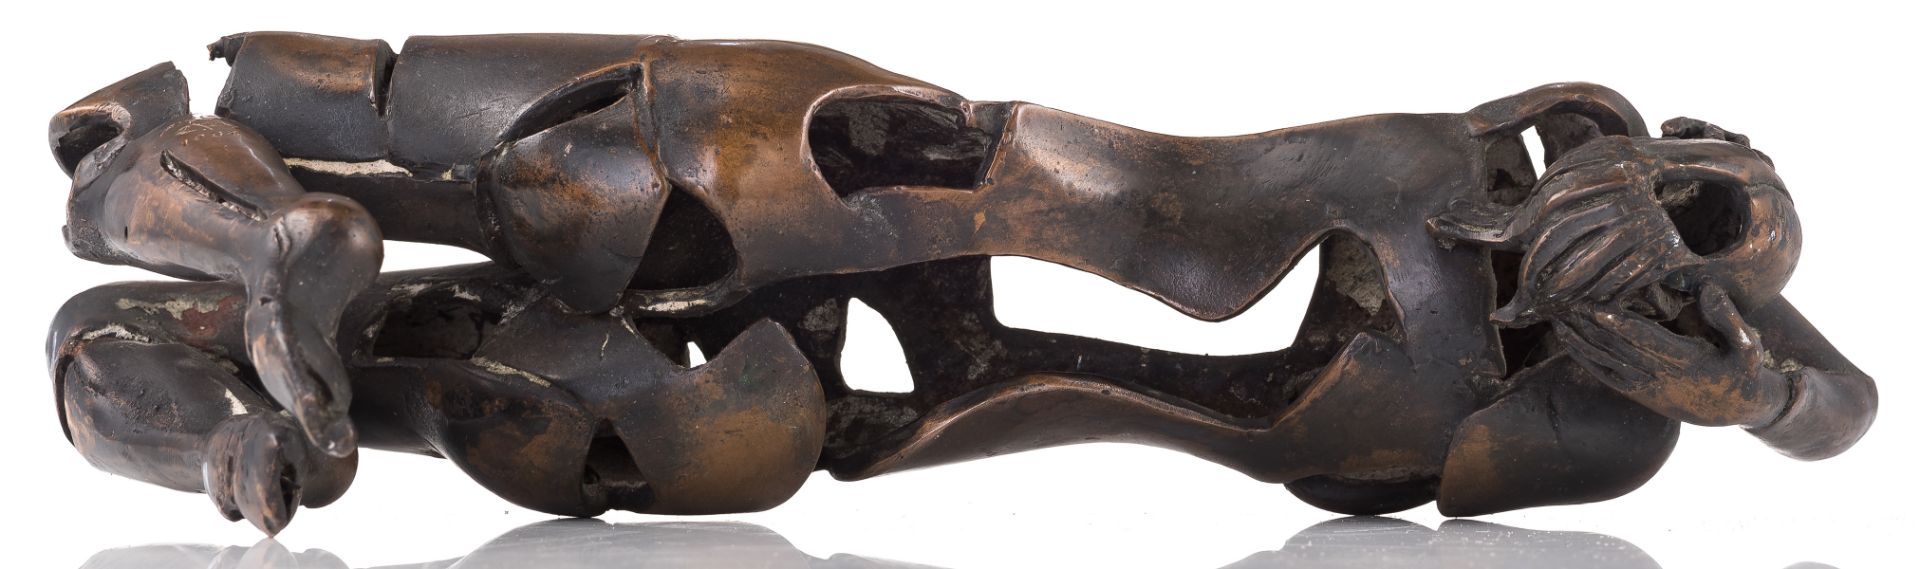 Poot R., 'Femme agenouillée', bronze, e/a, dated 1984, H 31 cm Is possibly subject of the SABAM legi - Image 7 of 8